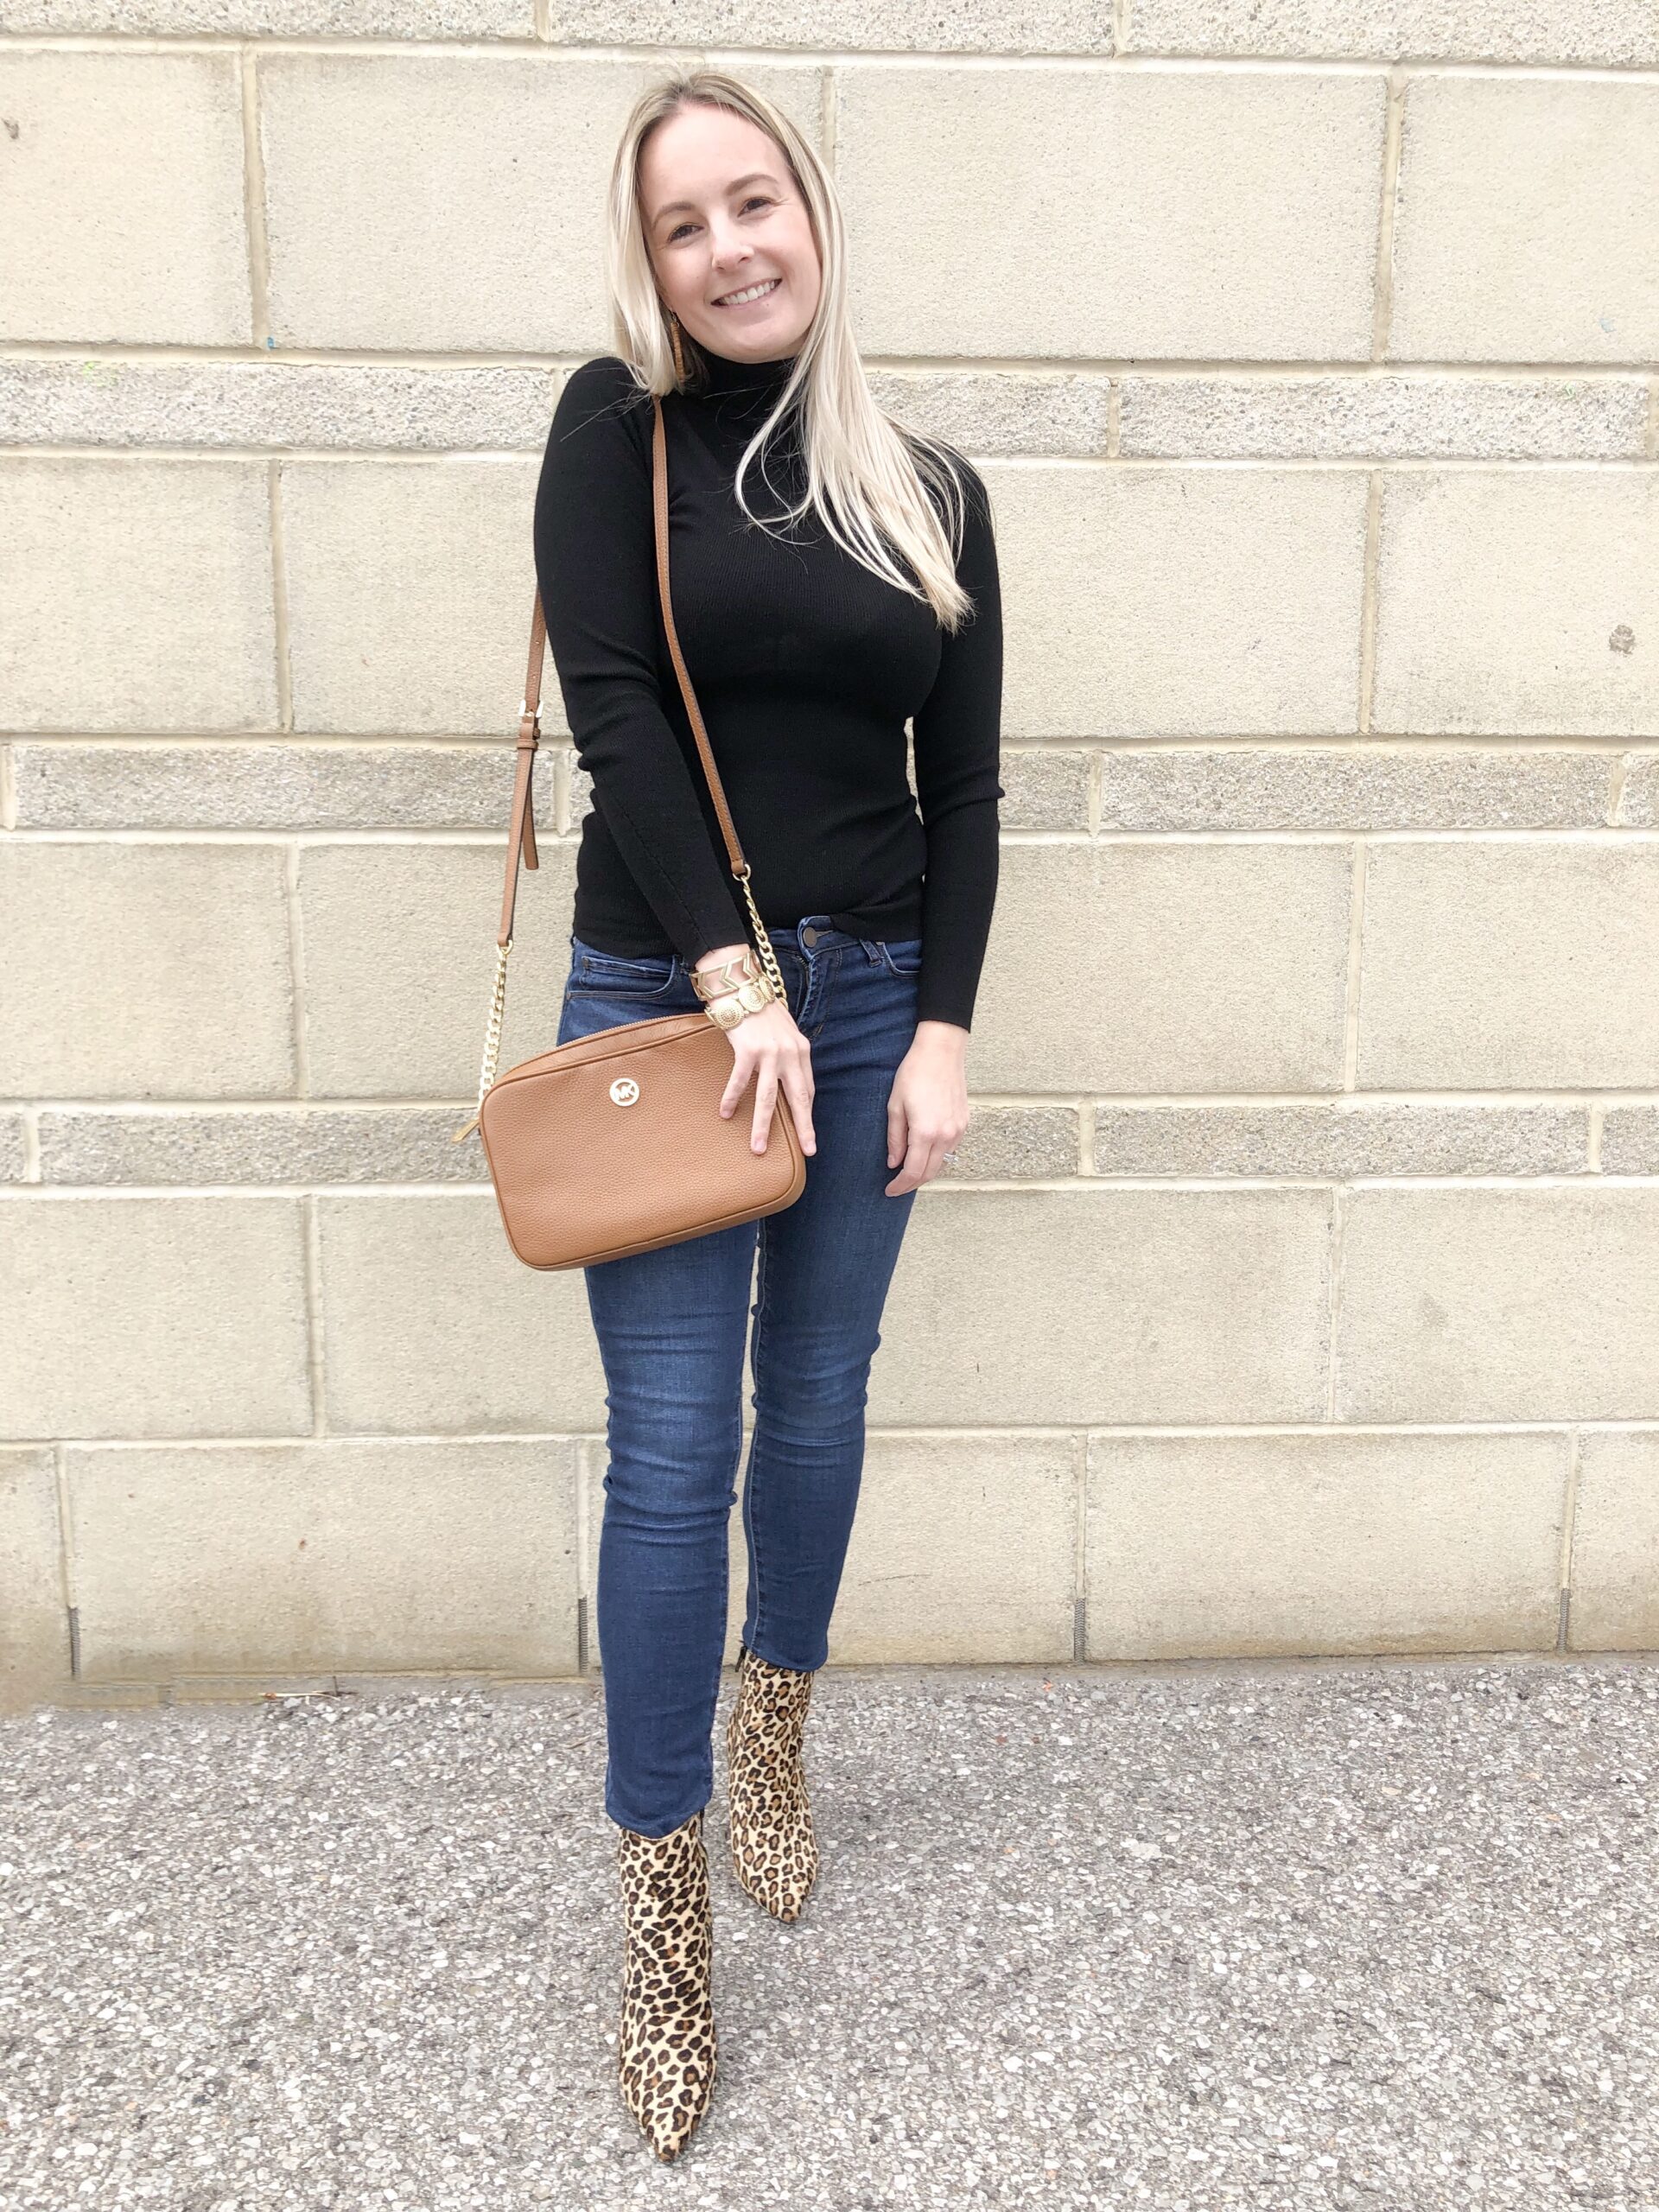  leopard print booties style post on livin' life with style 